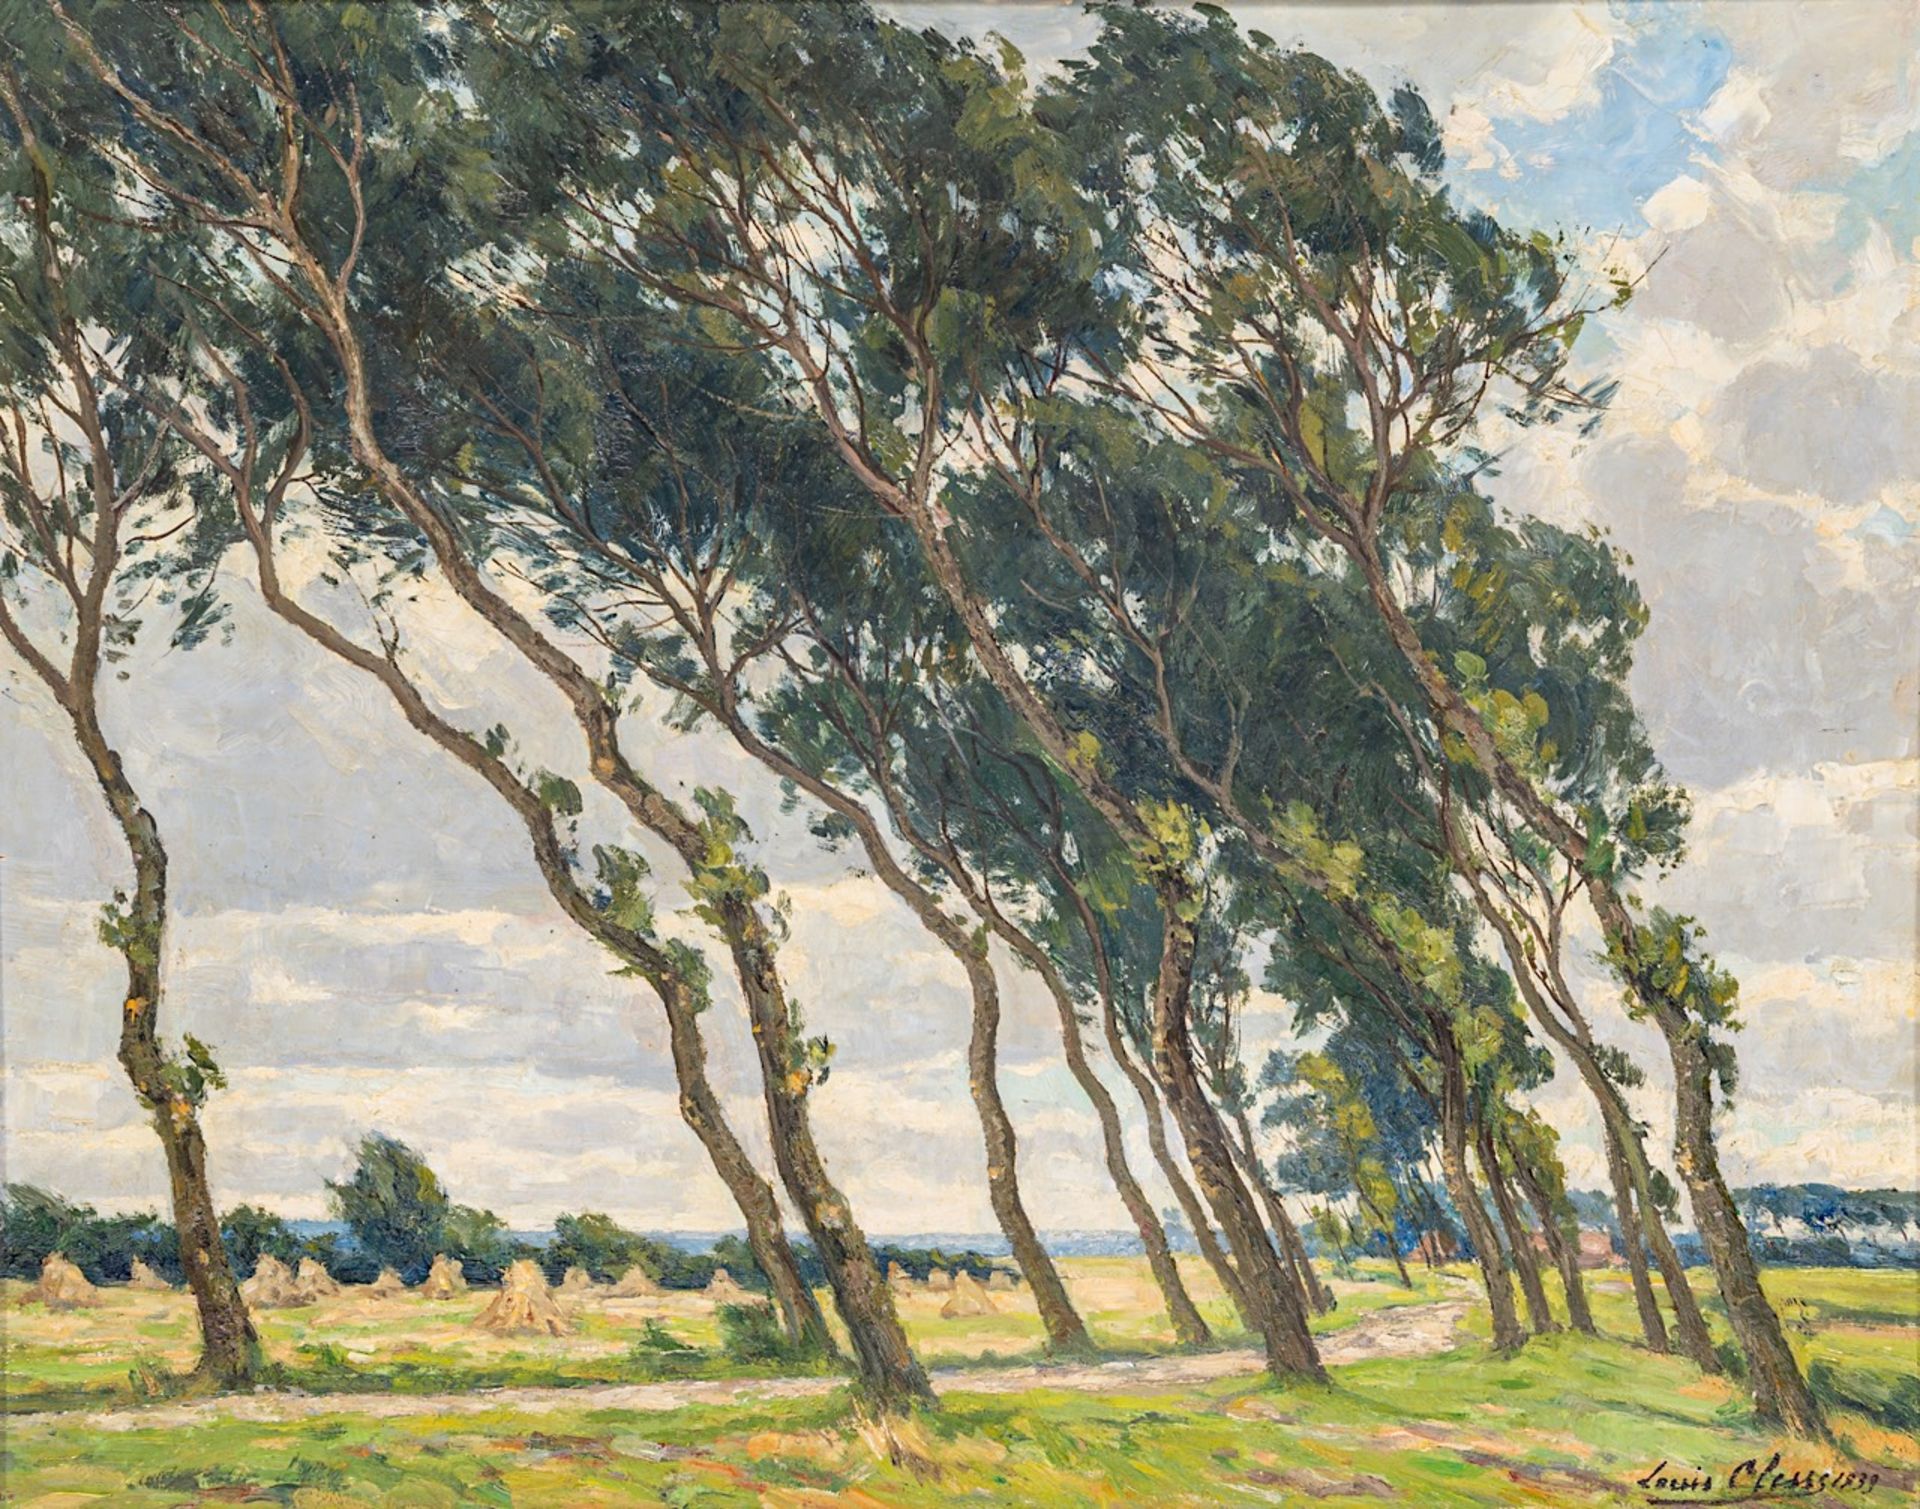 Louis Clesse (1889-1961), landscape with trees, 1939, oil on panel 60 x 75 cm. (23.6 x 29.5 in.), Fr